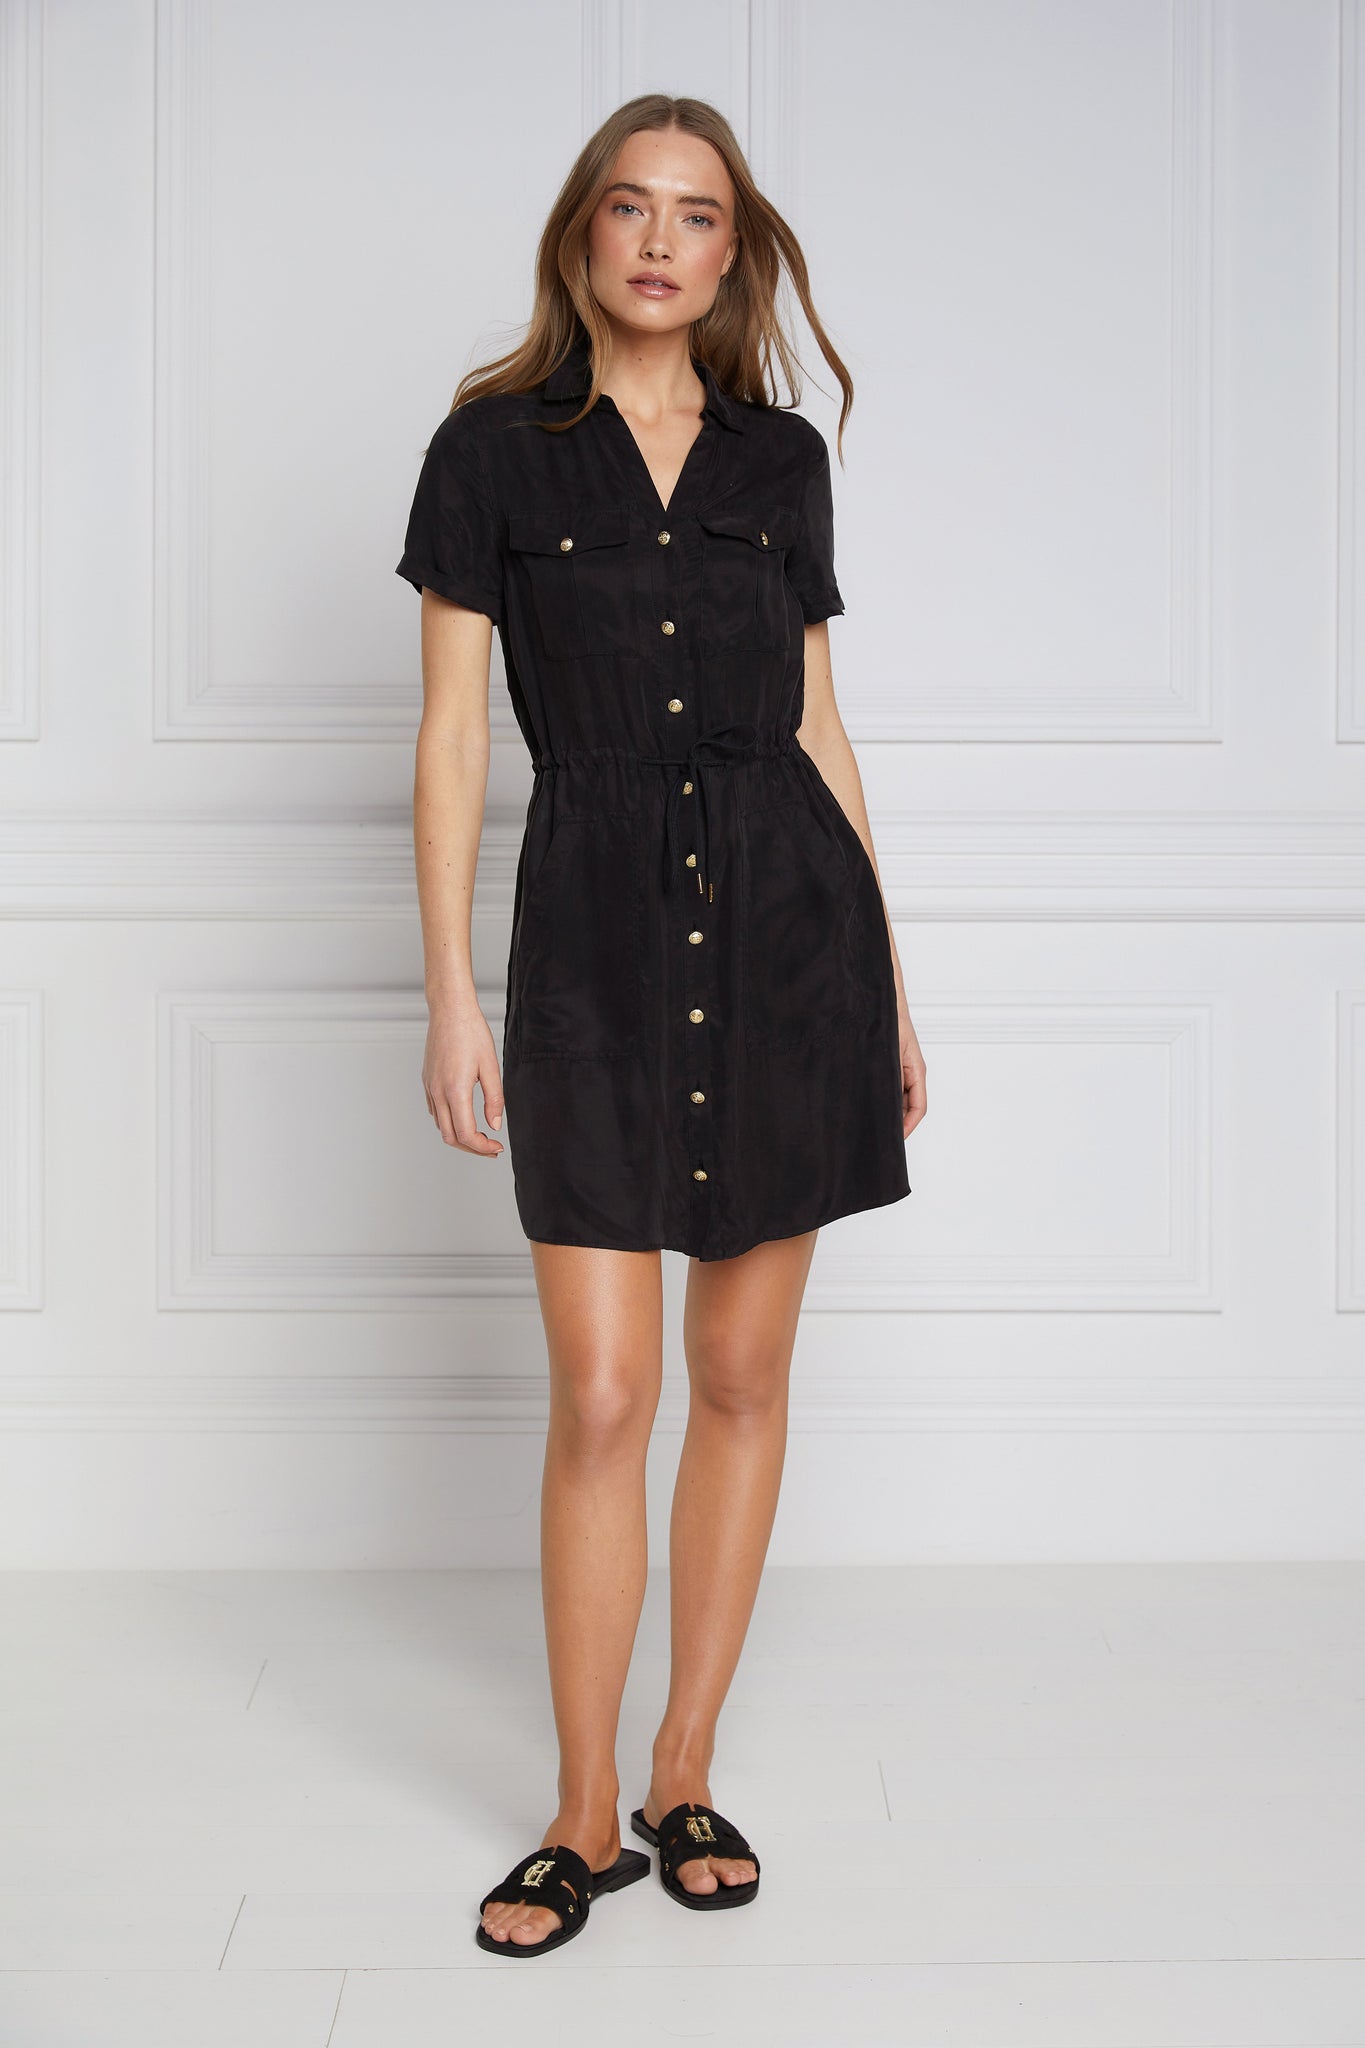 womens black military mini shirt dress with drawcord tie around the waist and gold buttons down the front and black sliders